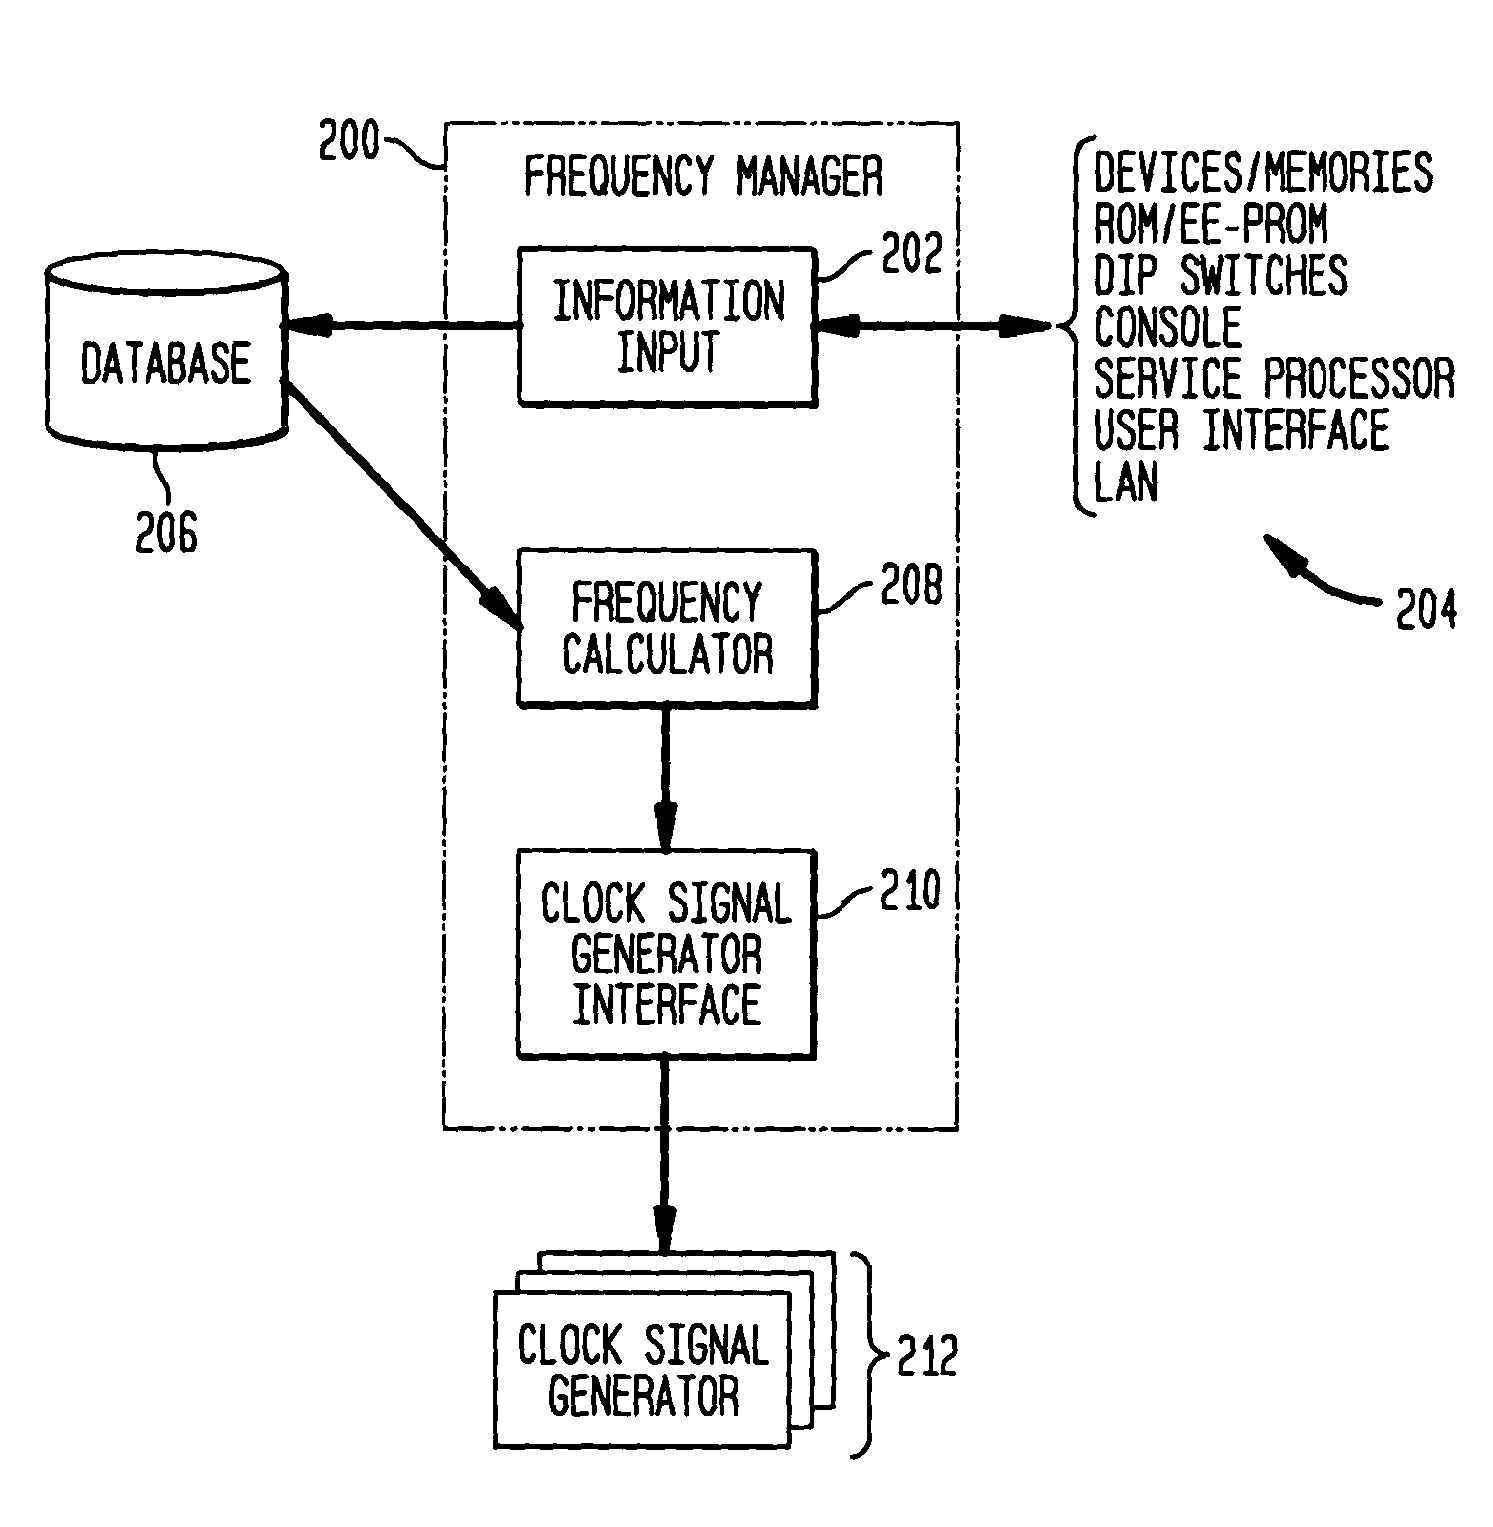 Bus clock frequency management based on device load